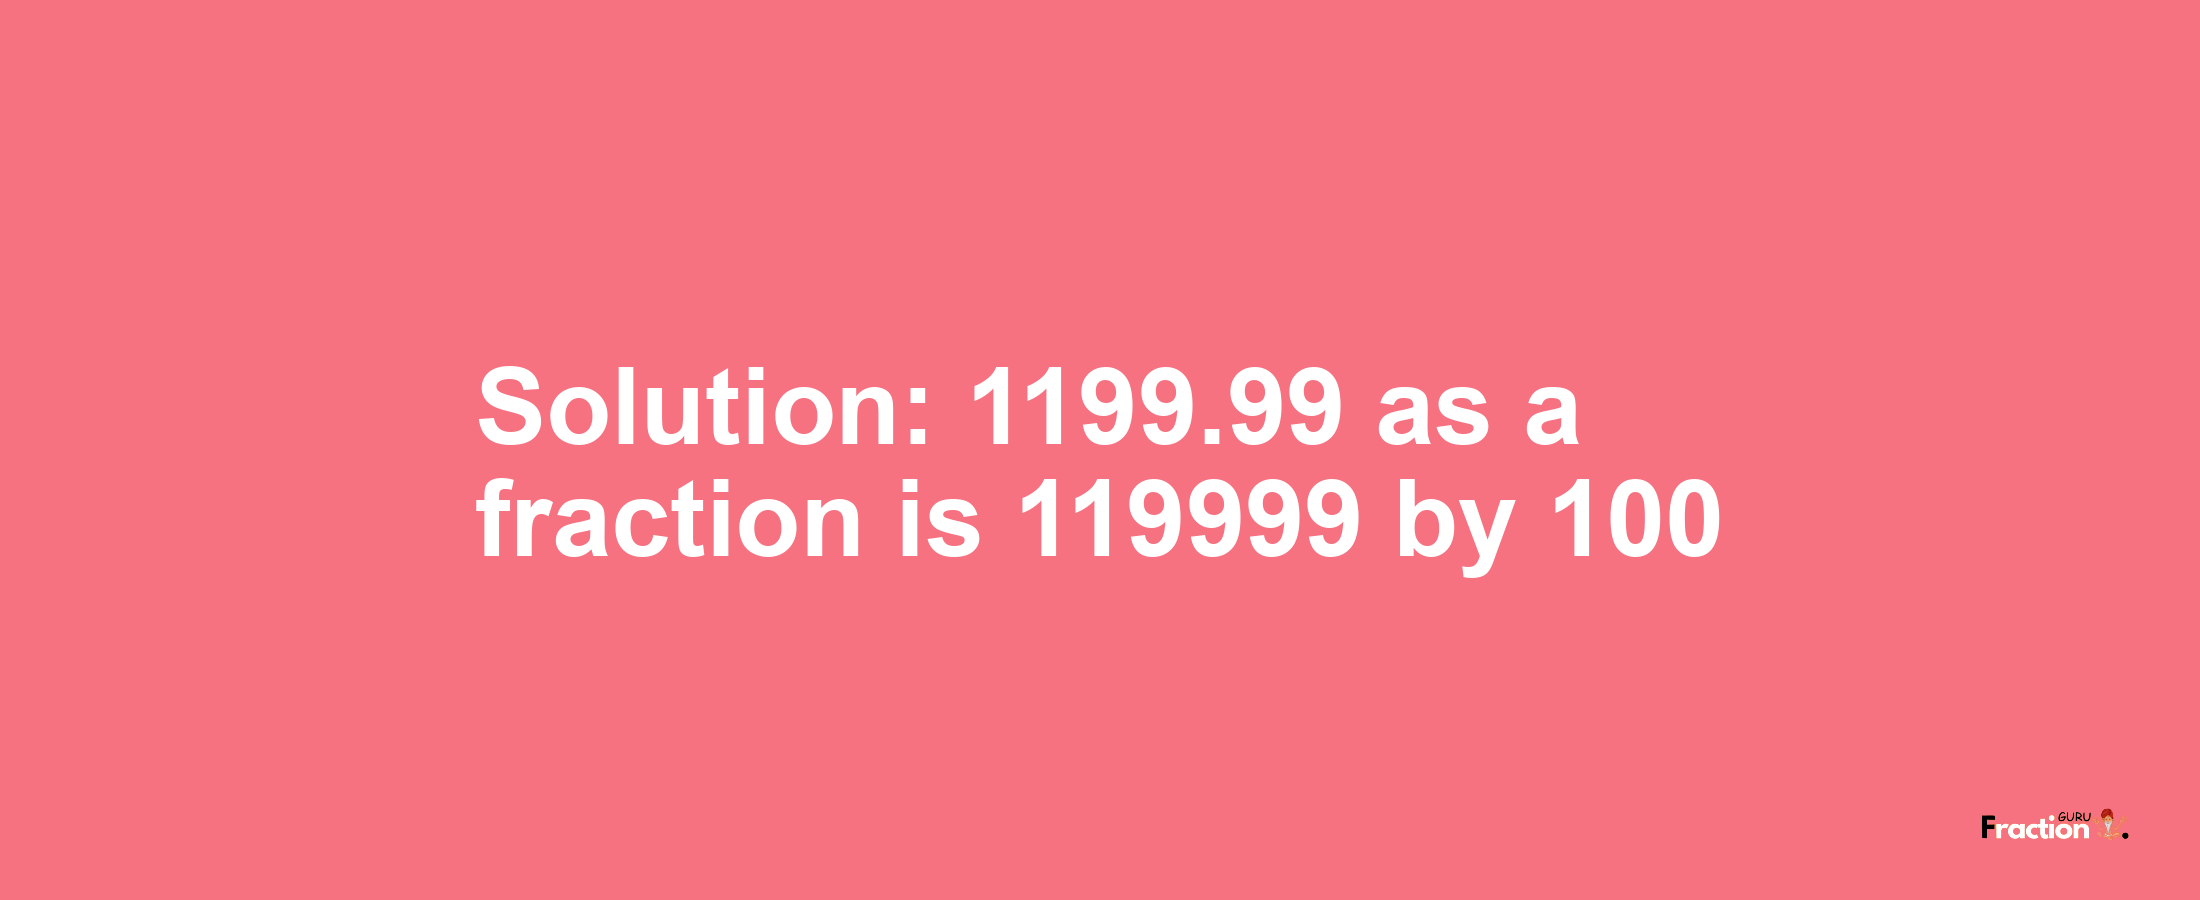 Solution:1199.99 as a fraction is 119999/100